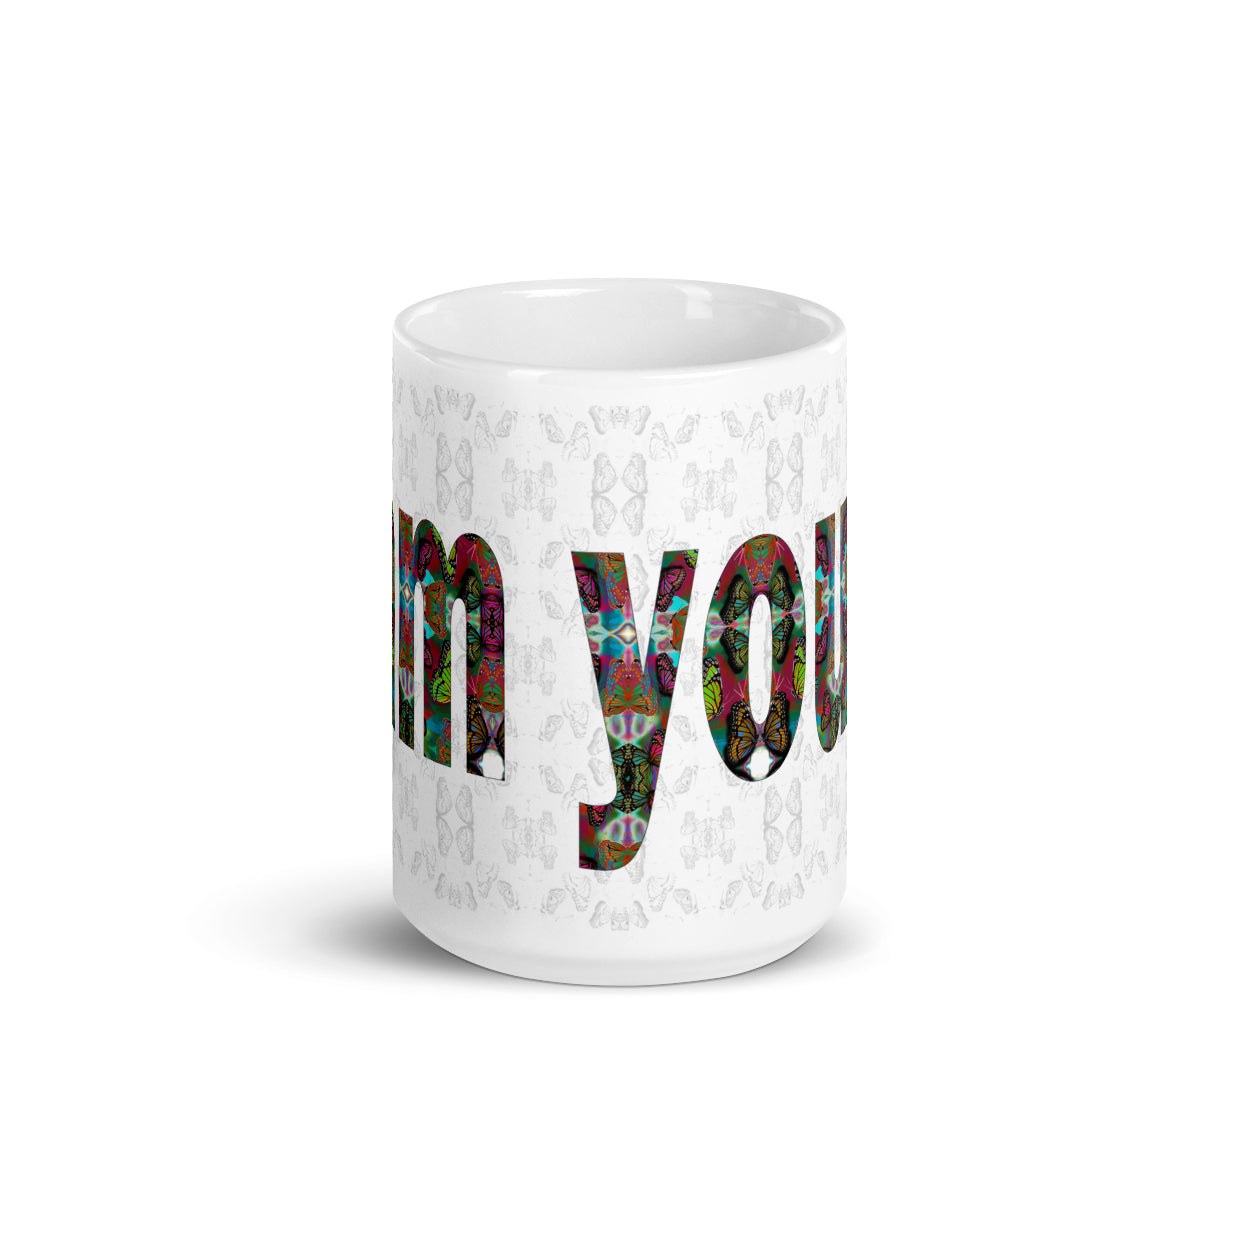 I am yours ~  LOVE ETERNAL Ceramic Mug; Colorful Butterflies Printed Words, Valentine's Day Gift